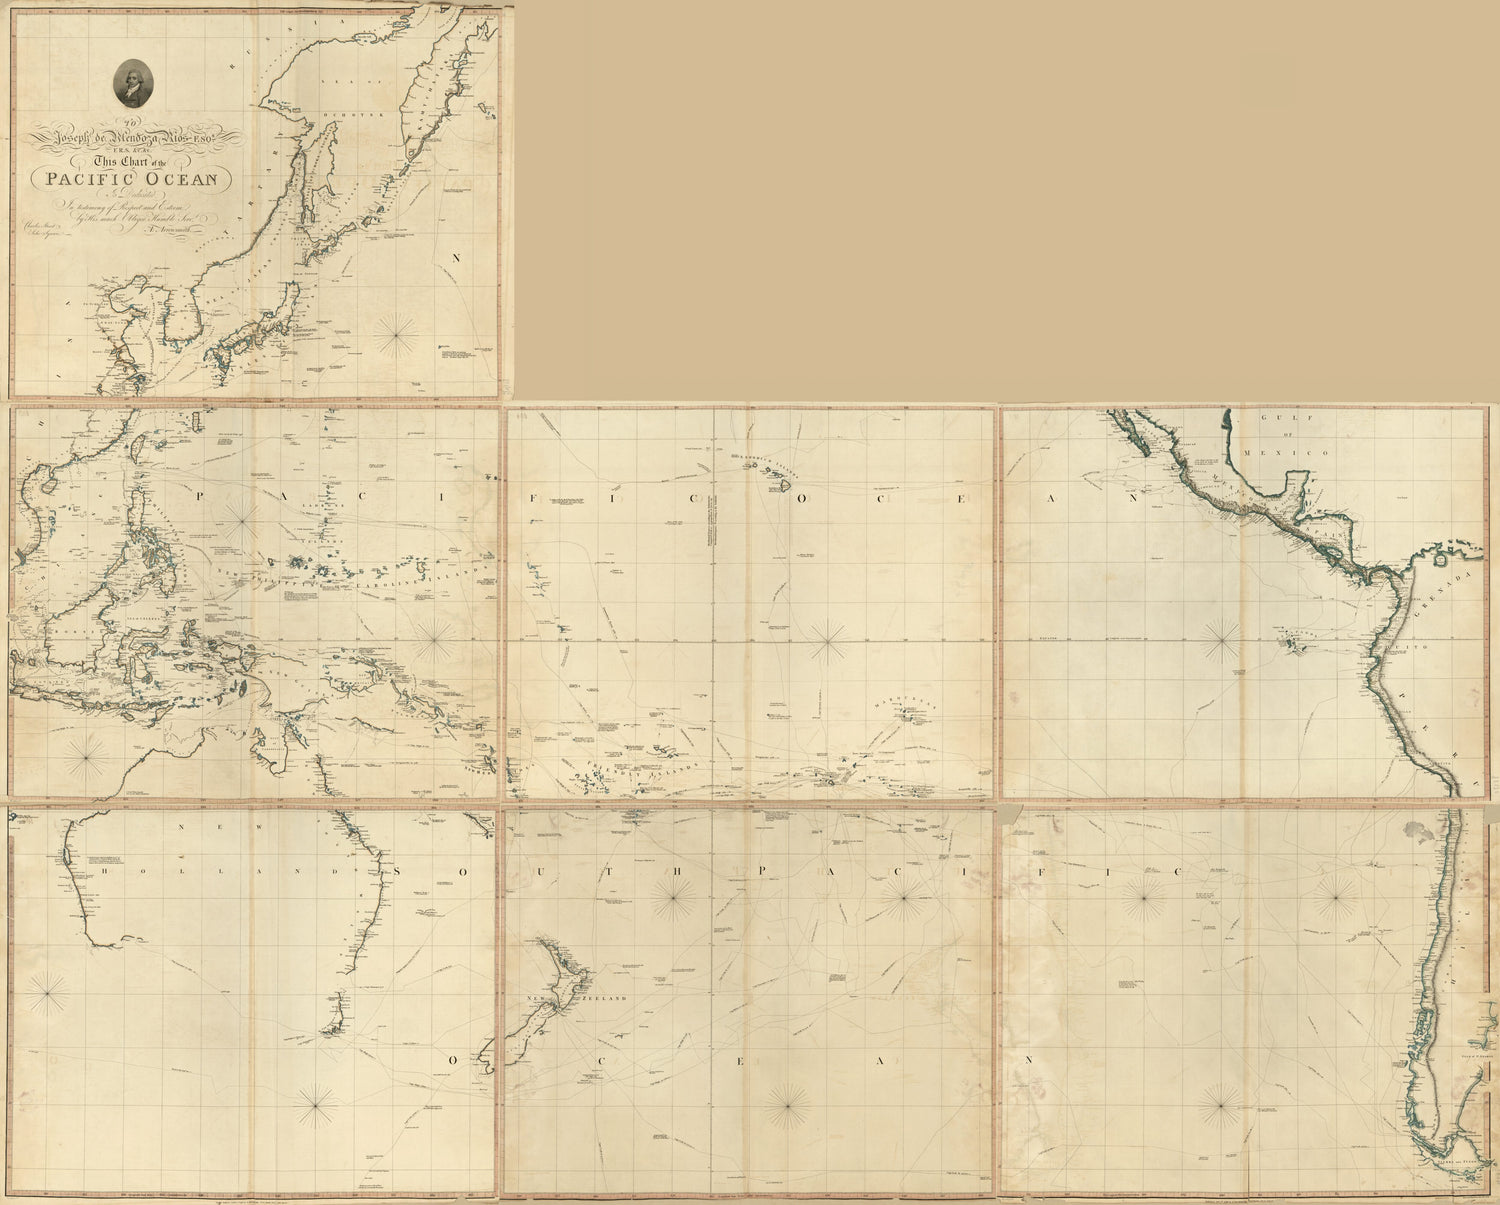 This old map of Chart of the Pacific Ocean : Drawn from a Great Number of Printed and Ms. Journals from 1798 was created by George Allen, Aaron Arrowsmith, T. (Thomas) Foot, José De Mendoza Y Riós in 1798